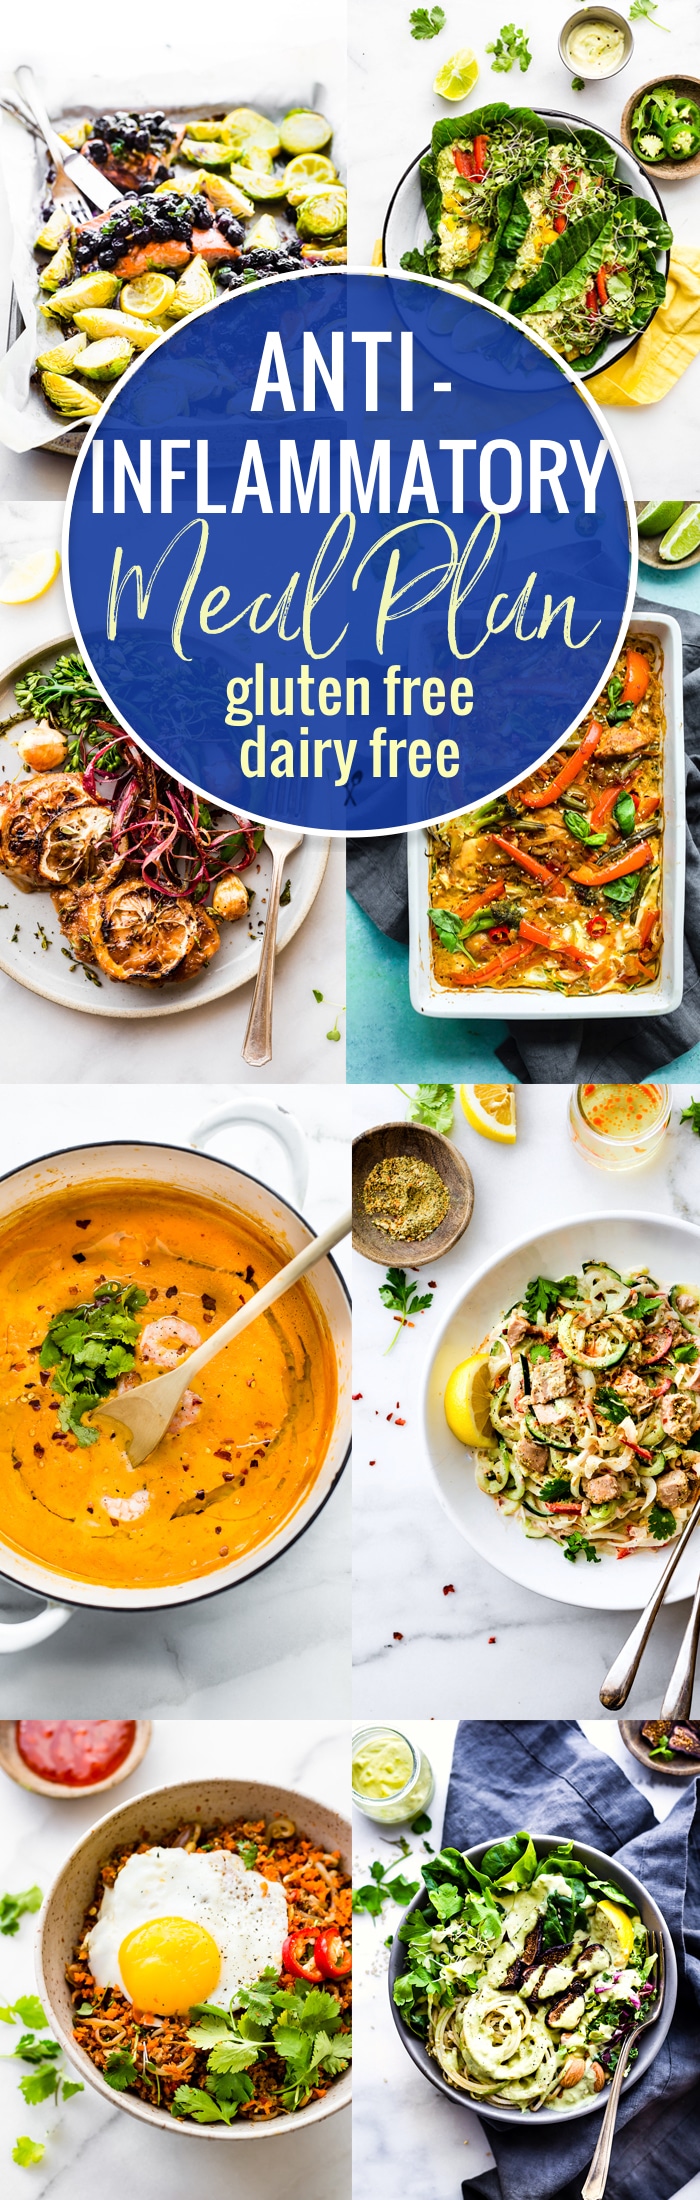 Food plays an key role in reducing inflammation in the body, so here’s a dairy free and gluten-free anti-inflammatory meal plan. It’s full of recipes that are nourishing for the mind and body! Simple, delicious, and rich in foods that are known for their anti-inflammatory properties. Vegan, Paleo, and Whole 30 friendly options. www.cottercrunch.com